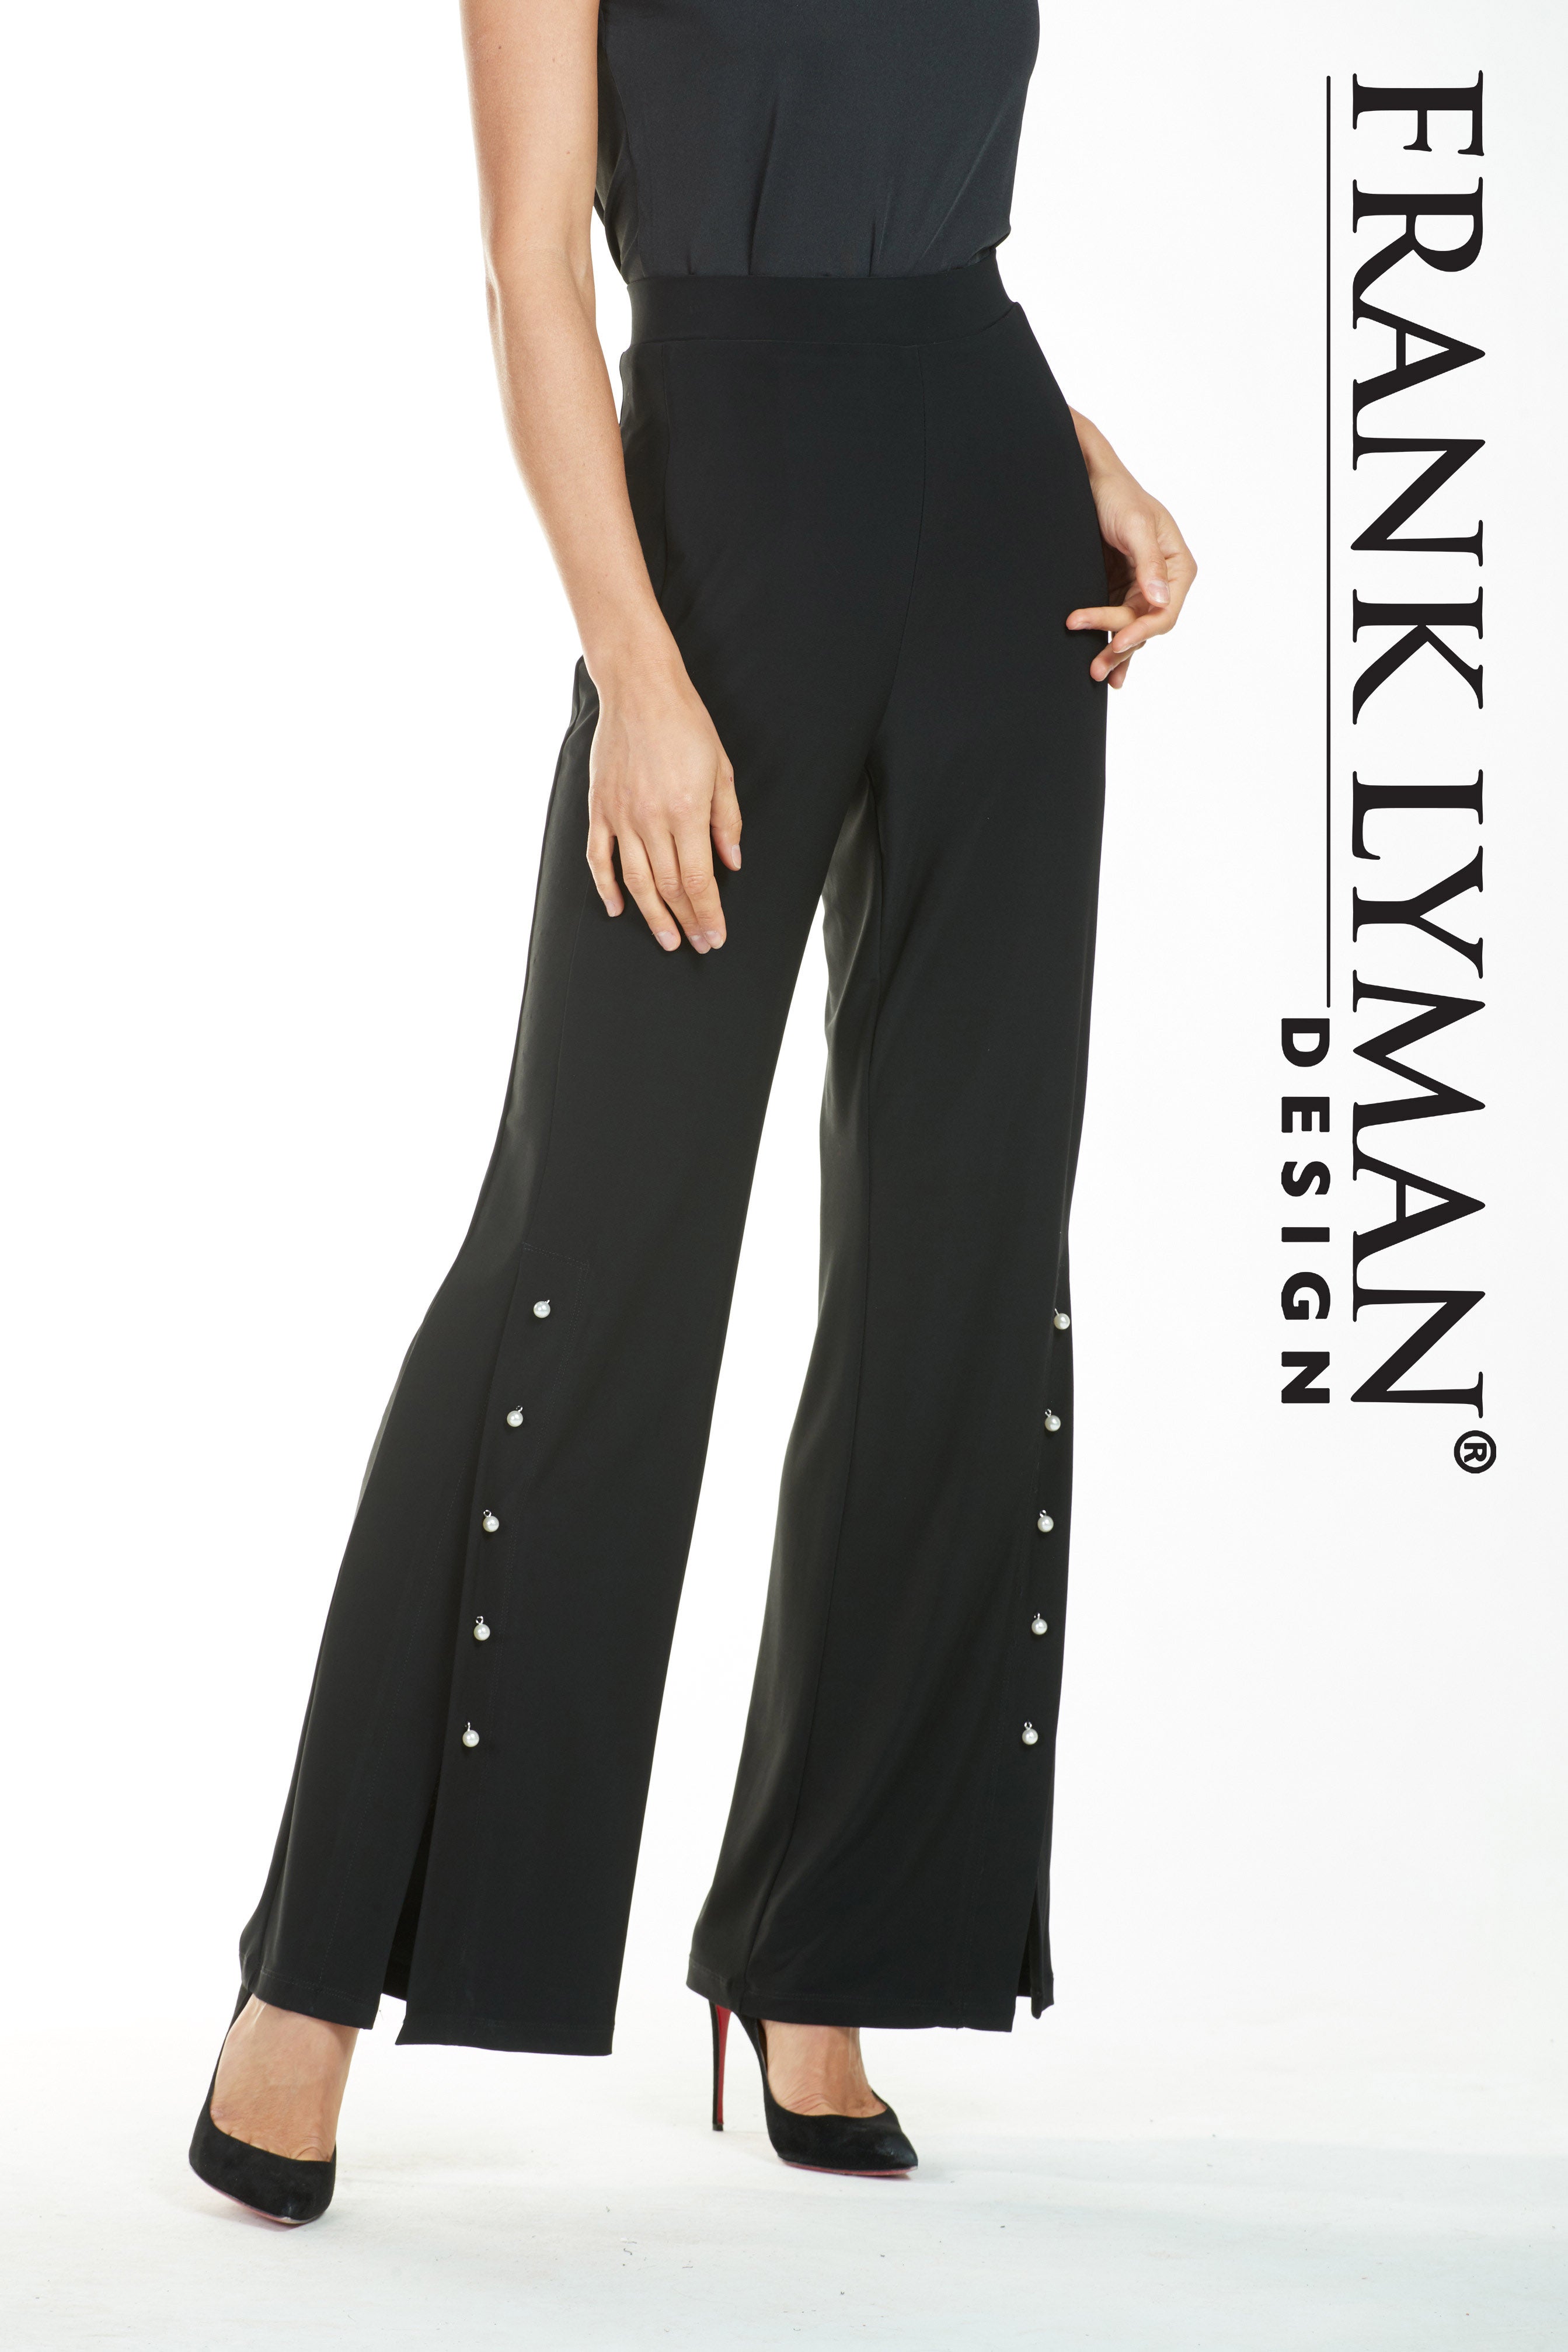 185001  (Black palazzo pant only)